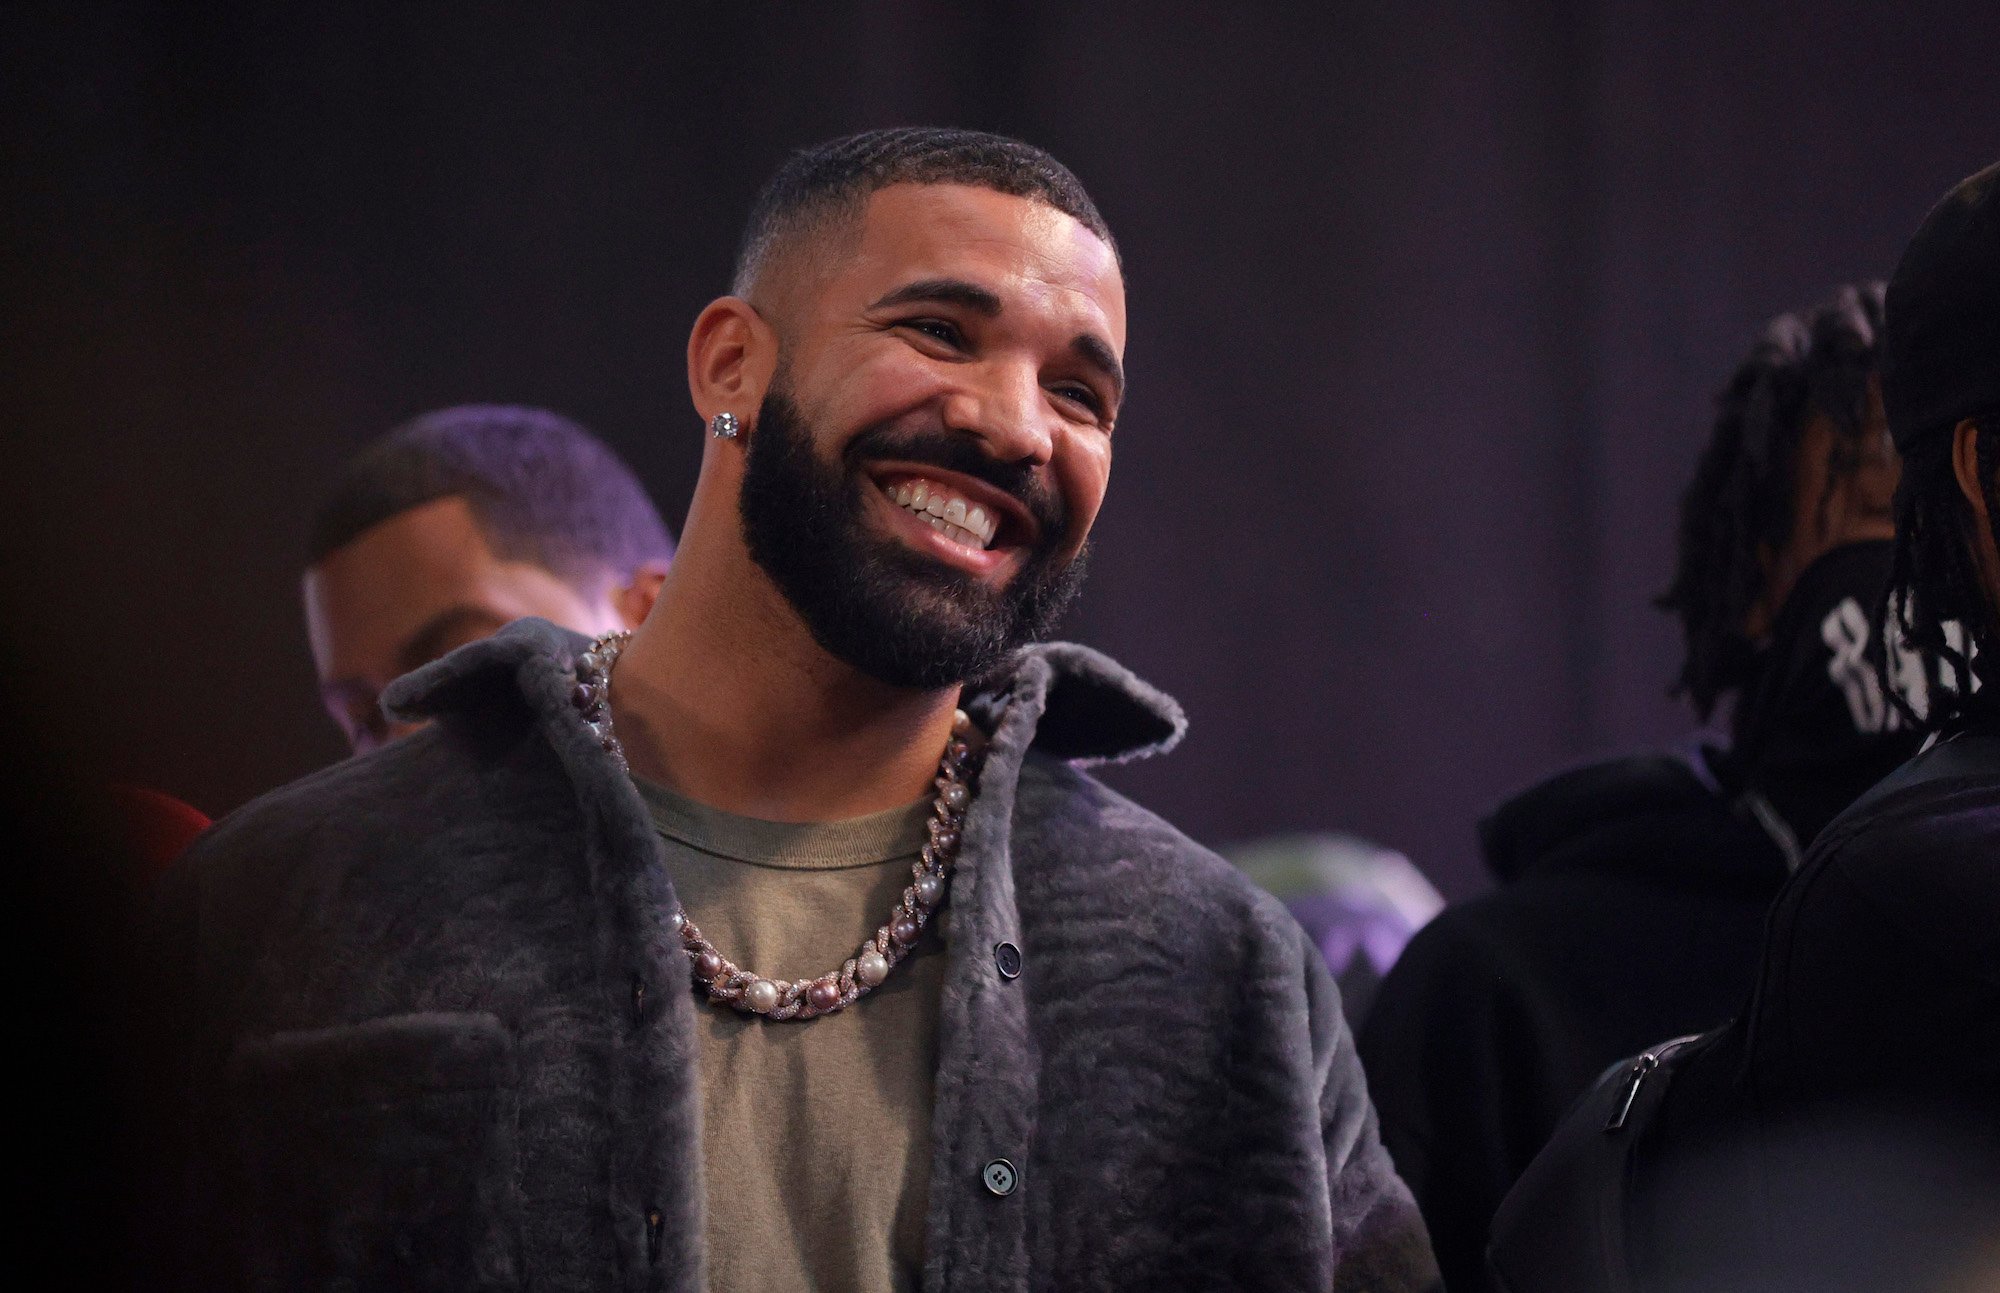 Drake, who was rumored to use ghostwriters, smiling for a photo